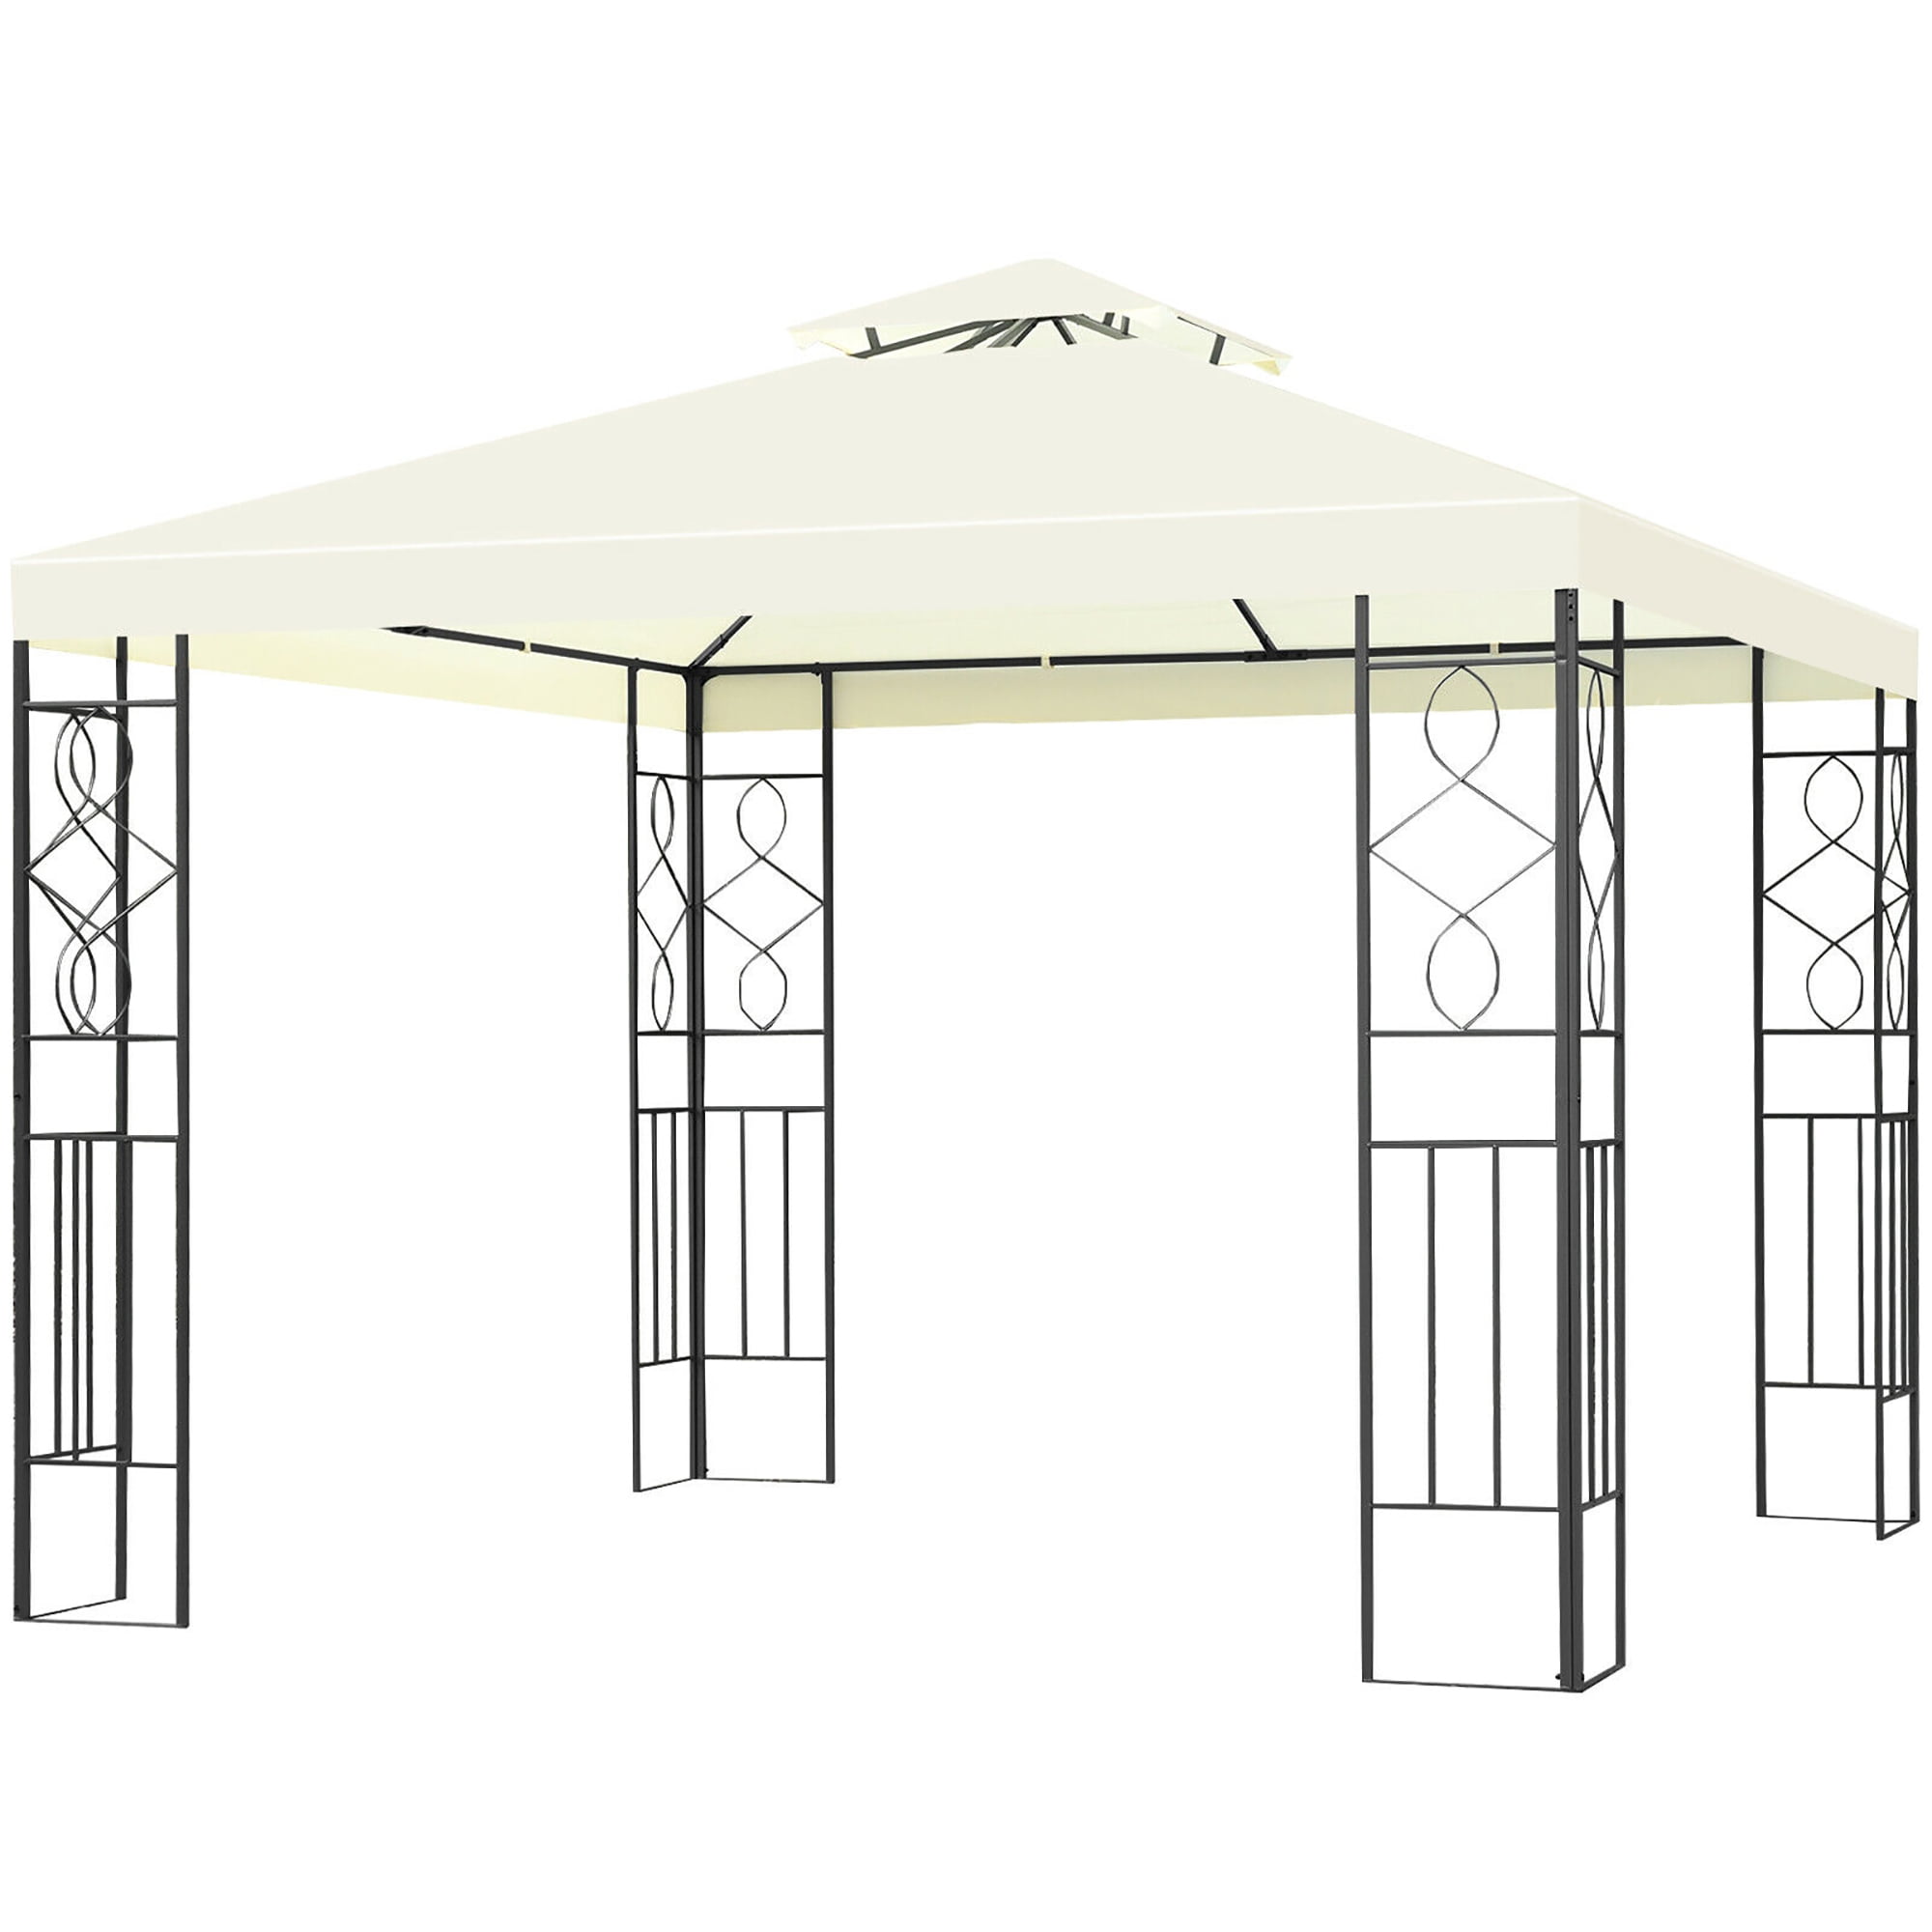 10'x13' Outdoor 2-Tier Vented Canopy Steel Gazebo BBQ Party Tent Shelter Shade